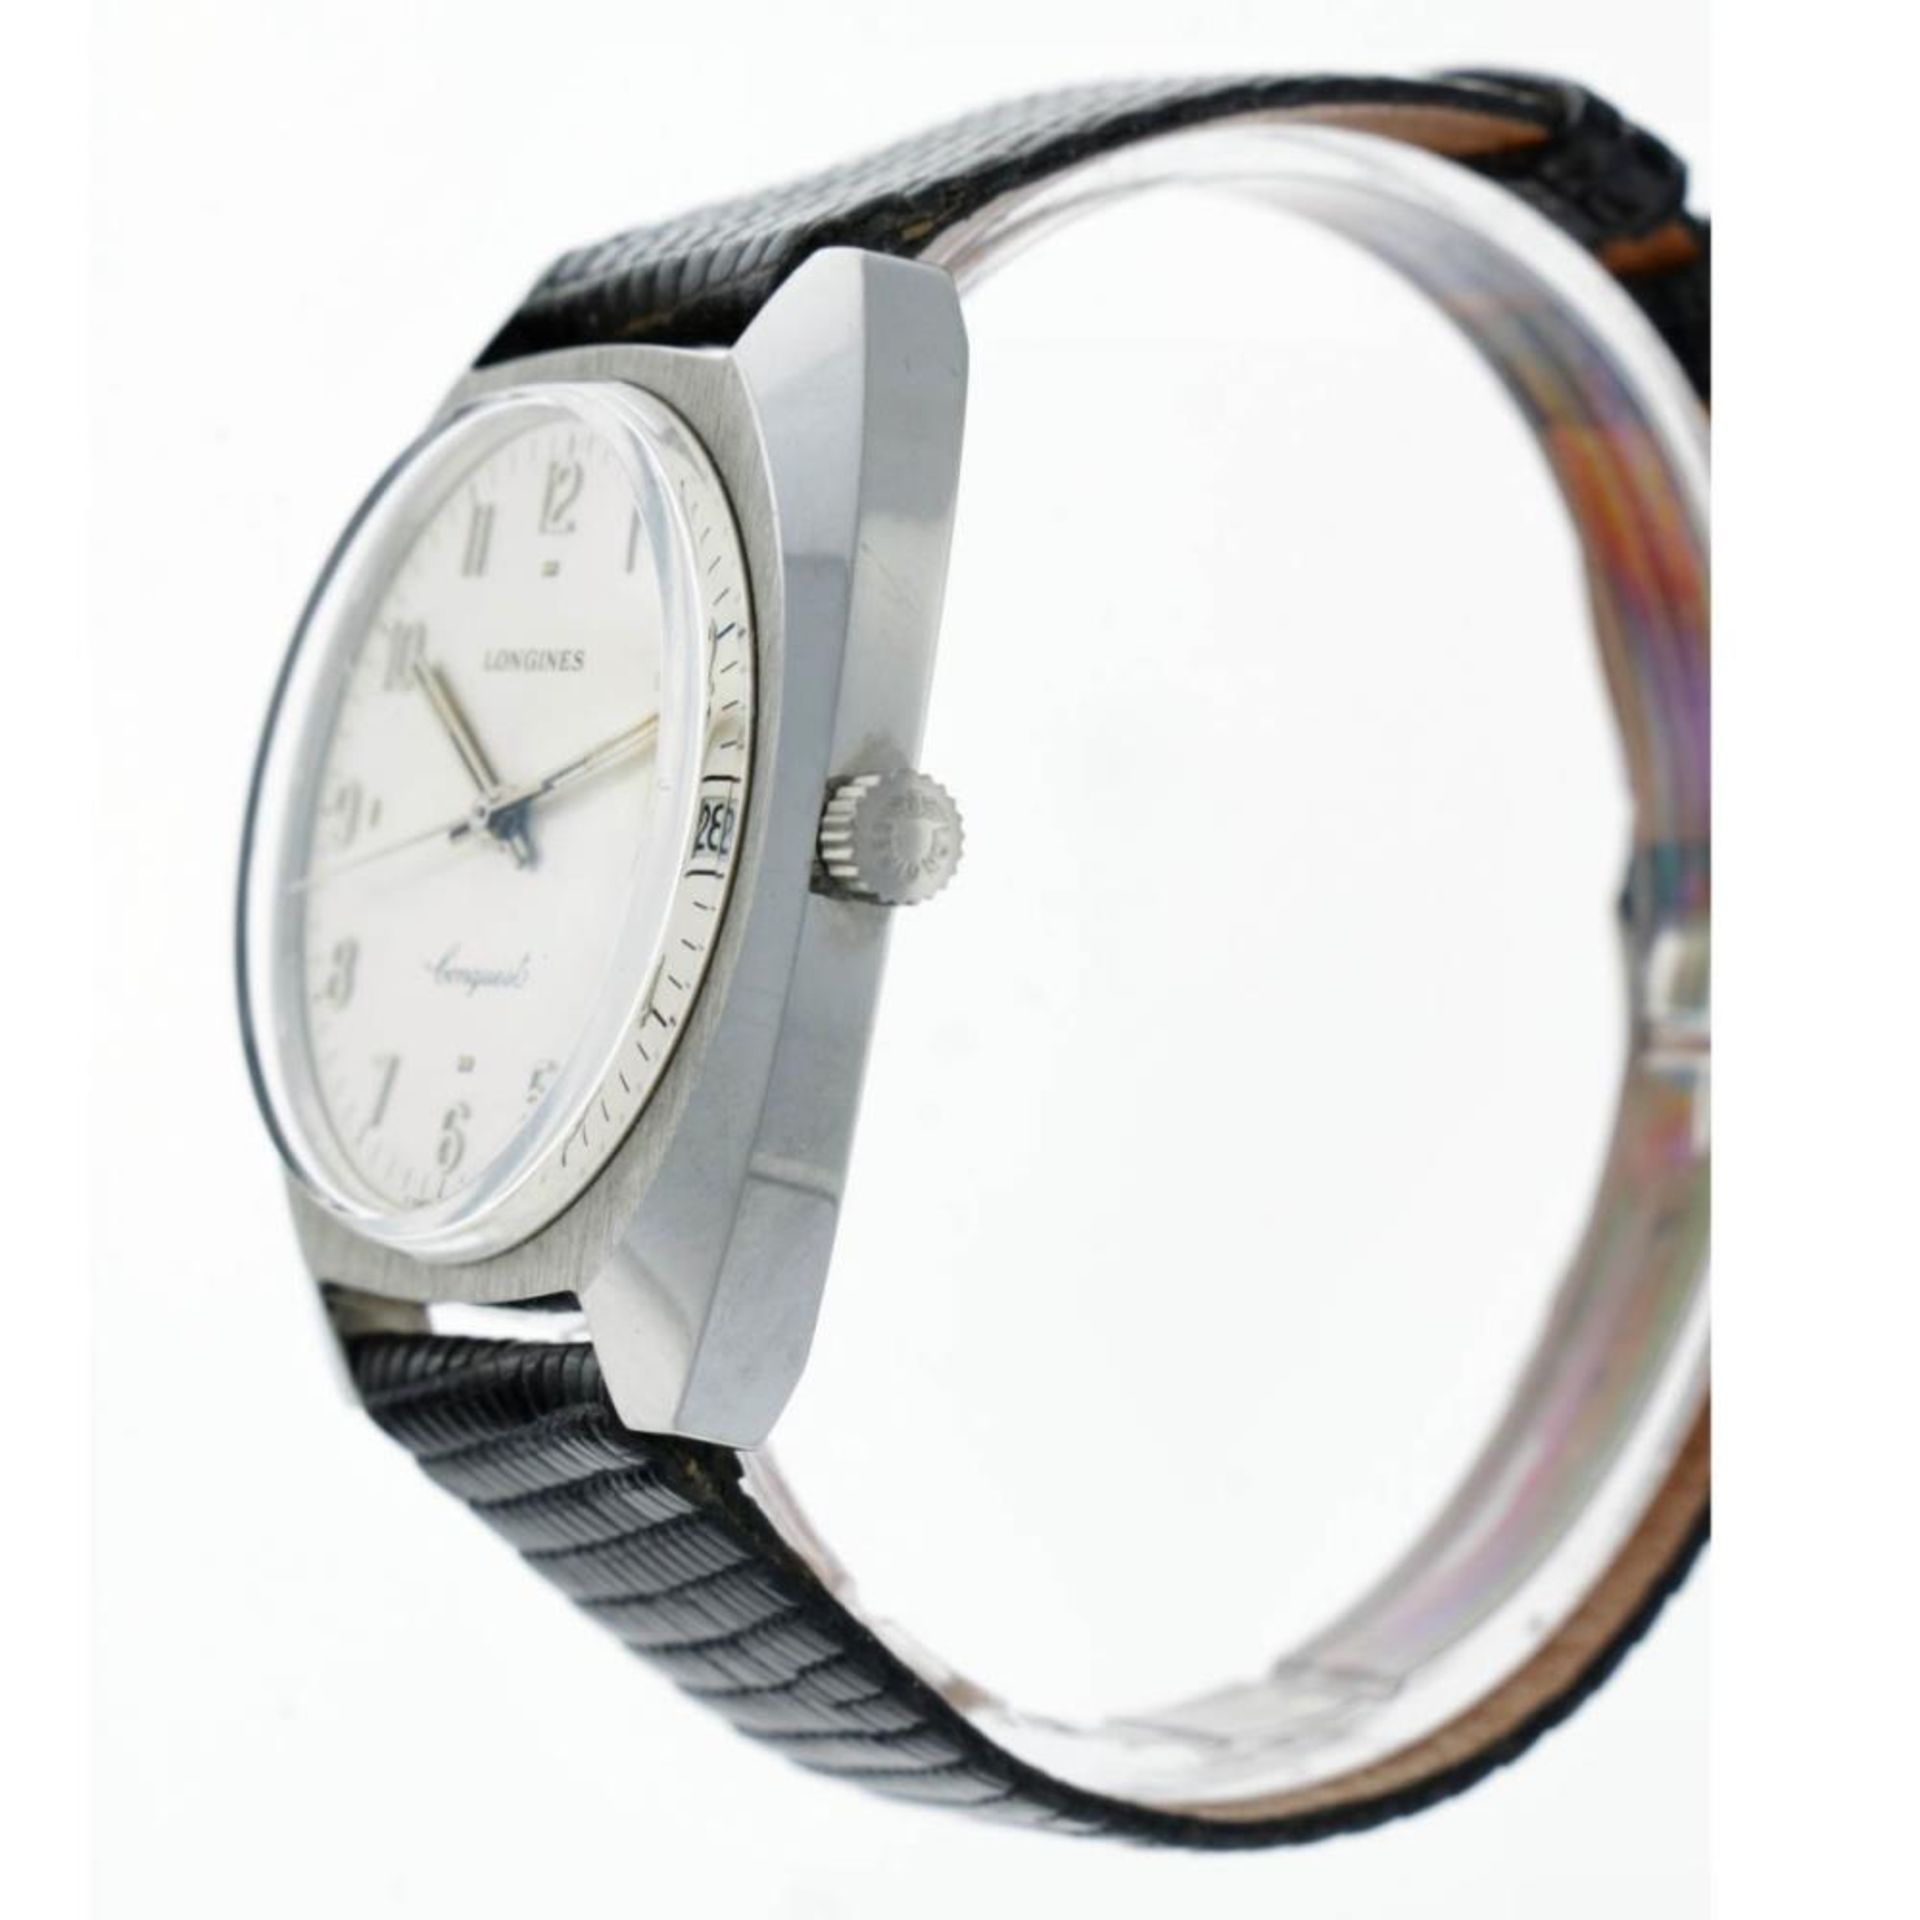 Longines Conquest - Men's Watch - approx. 1970. - Image 9 of 10